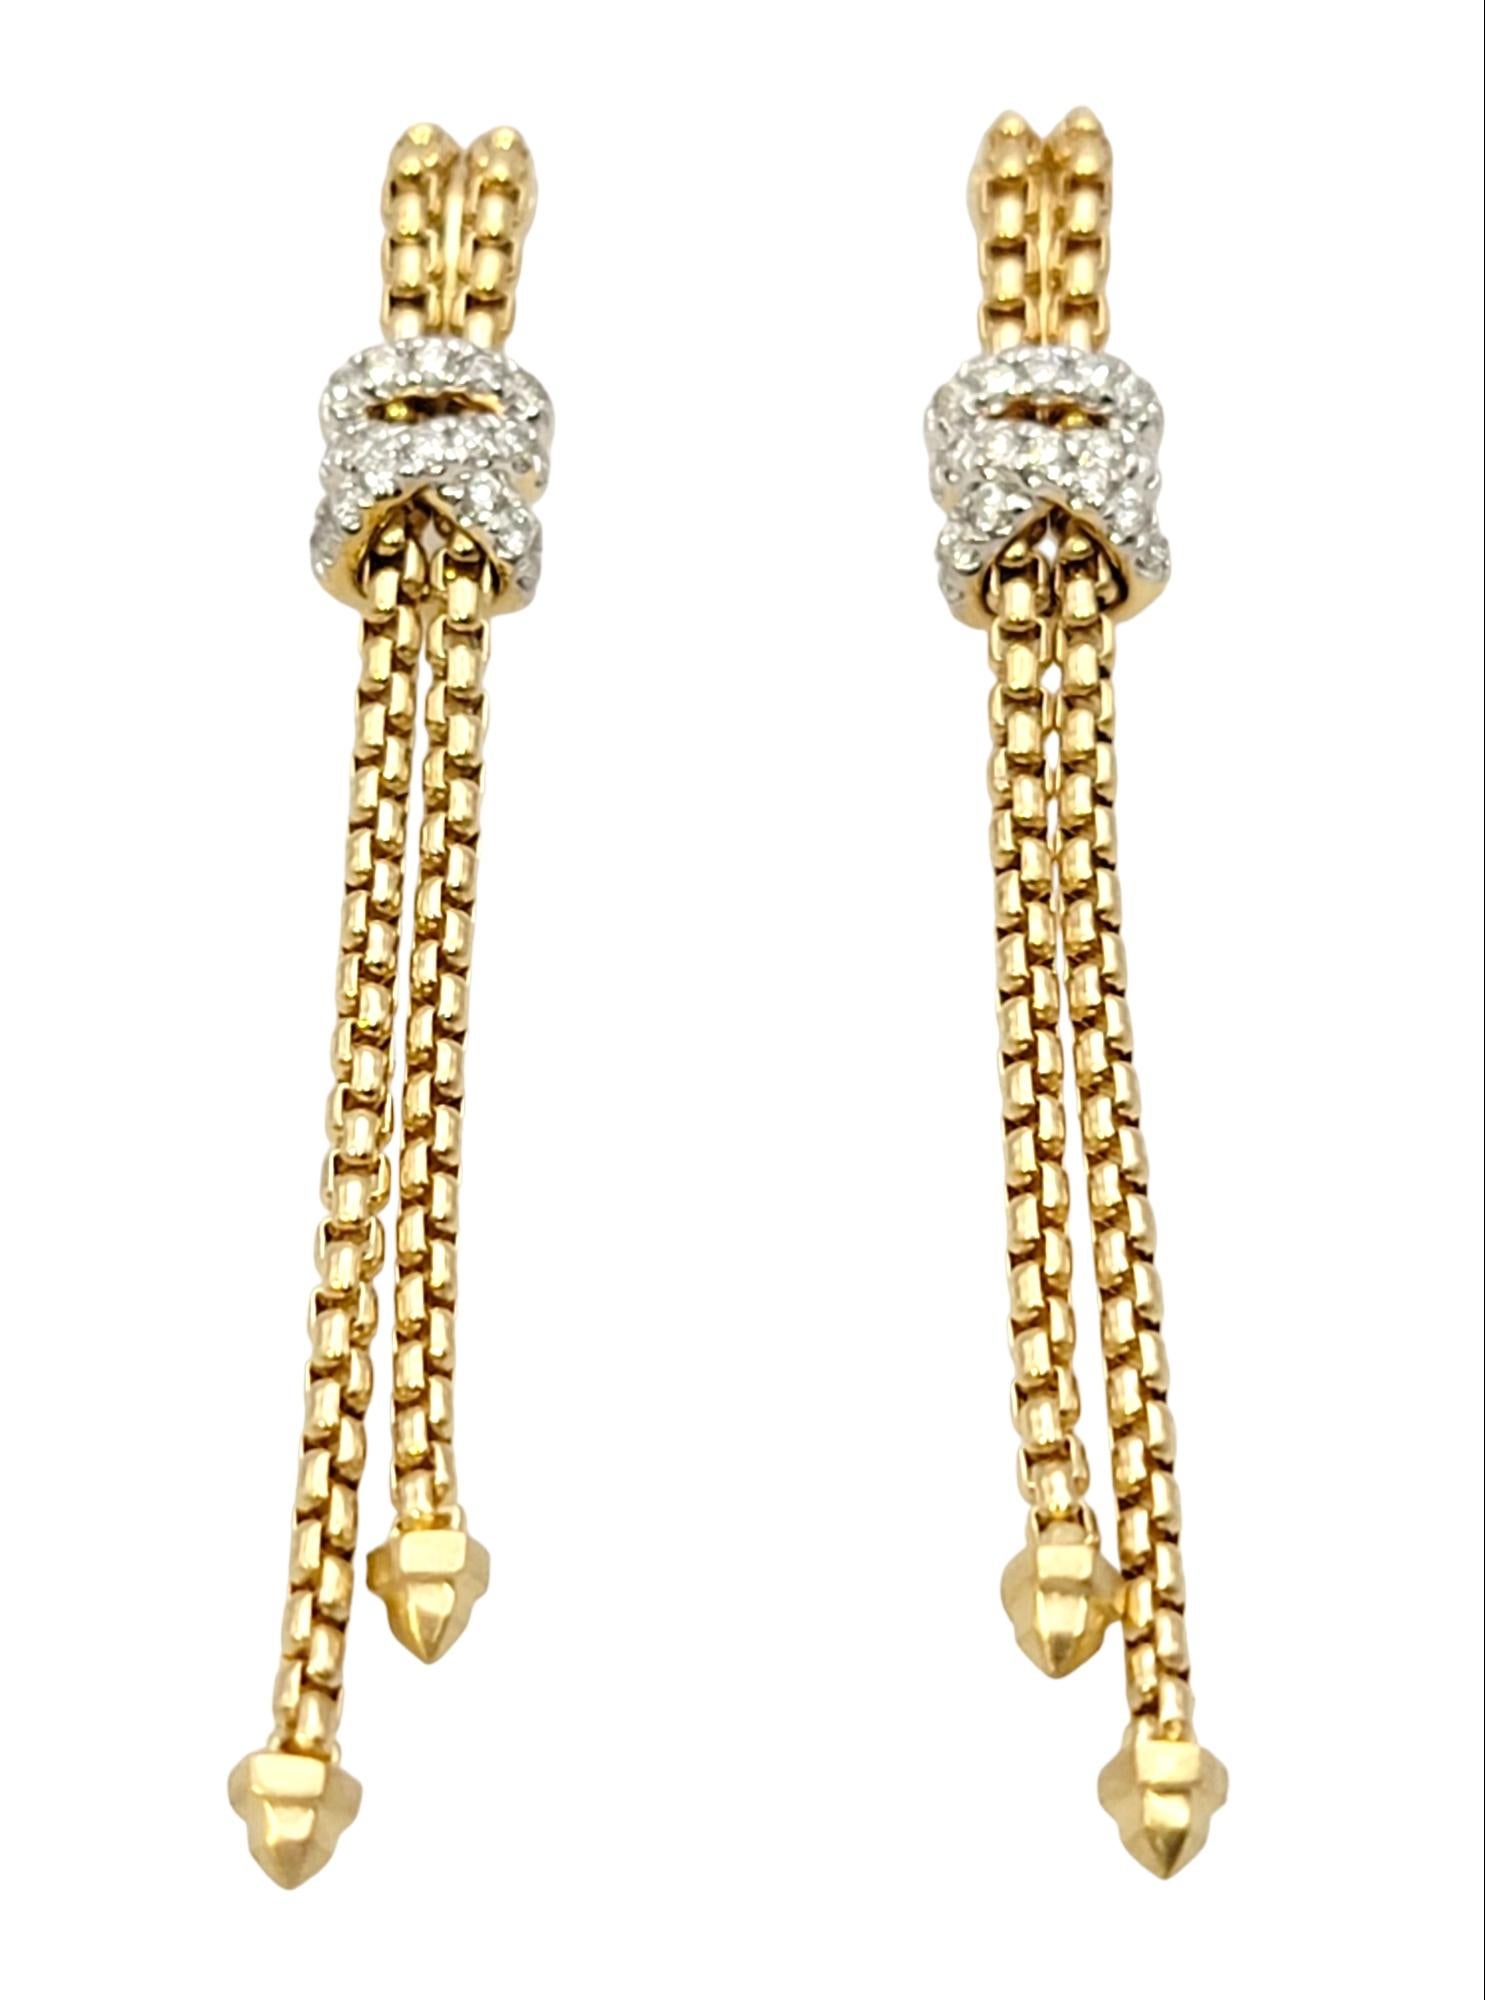 Lovely gold and diamond dangle earrings by popular jewelry designer, David Yurman. Founded in 1980 by artists David and Sybil Yurman, the company is, in their own words, “one long art project.” Their ability to fuse fashion, art and jewelry into